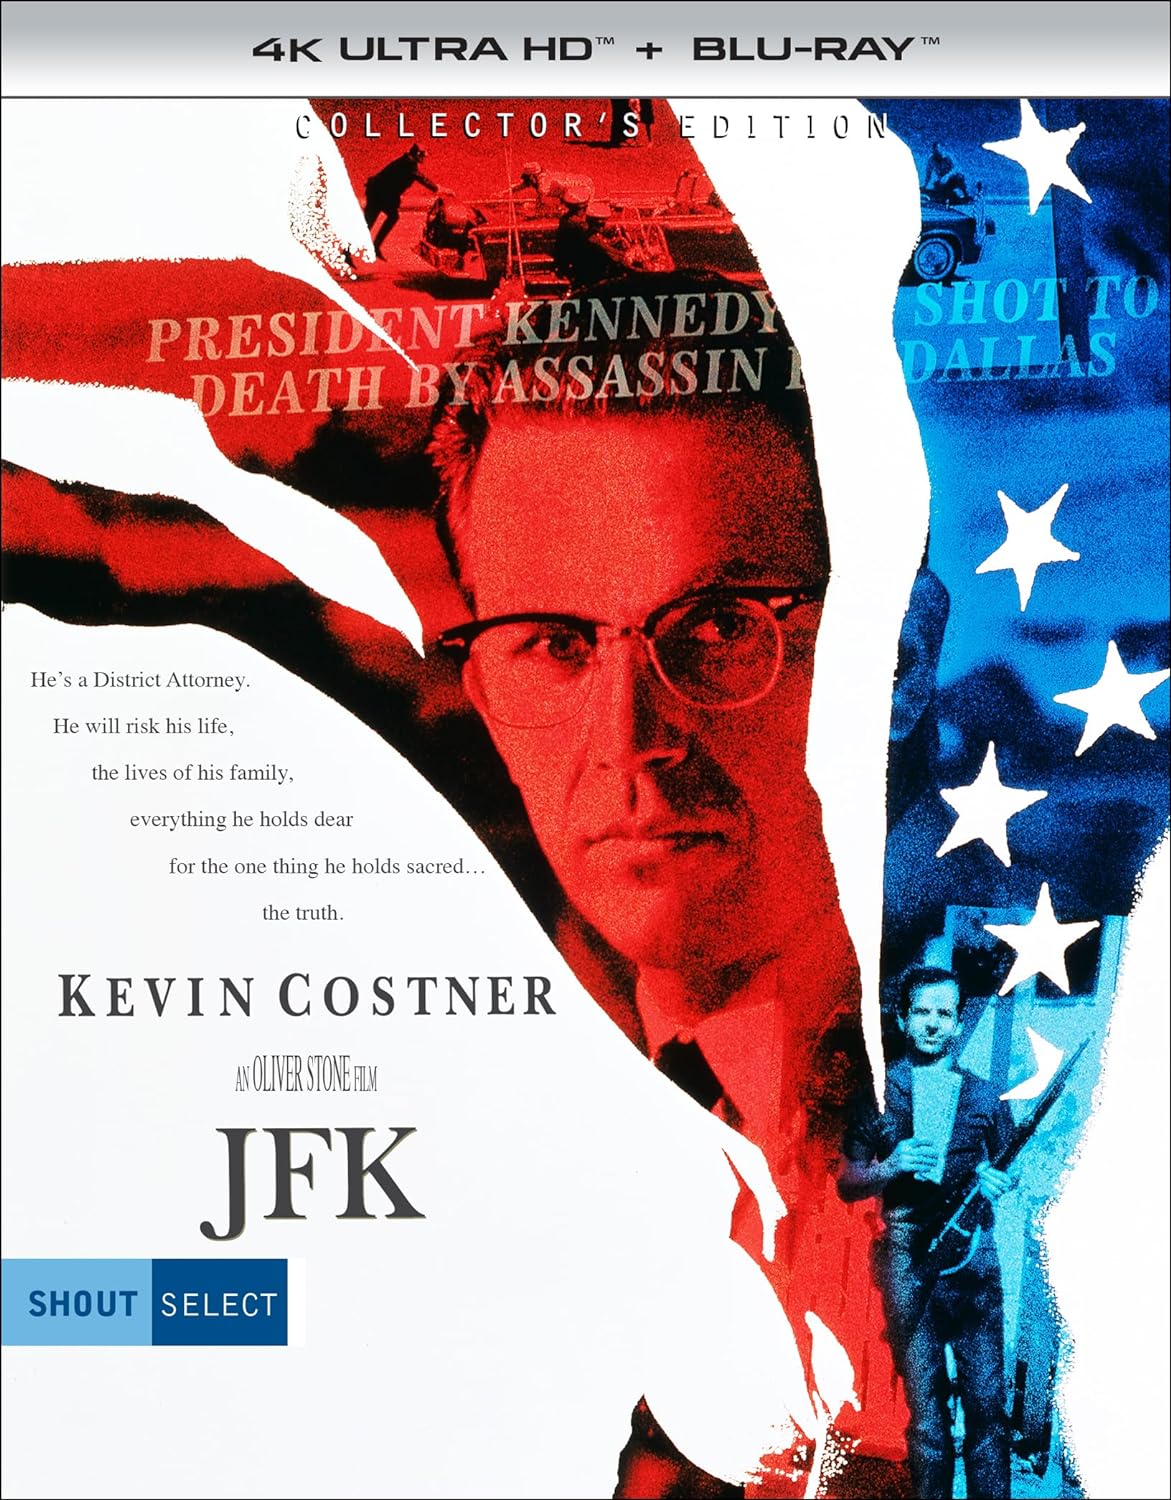 JFK Collector's Edition 4K UHD + Blu-ray (Shout Factory)